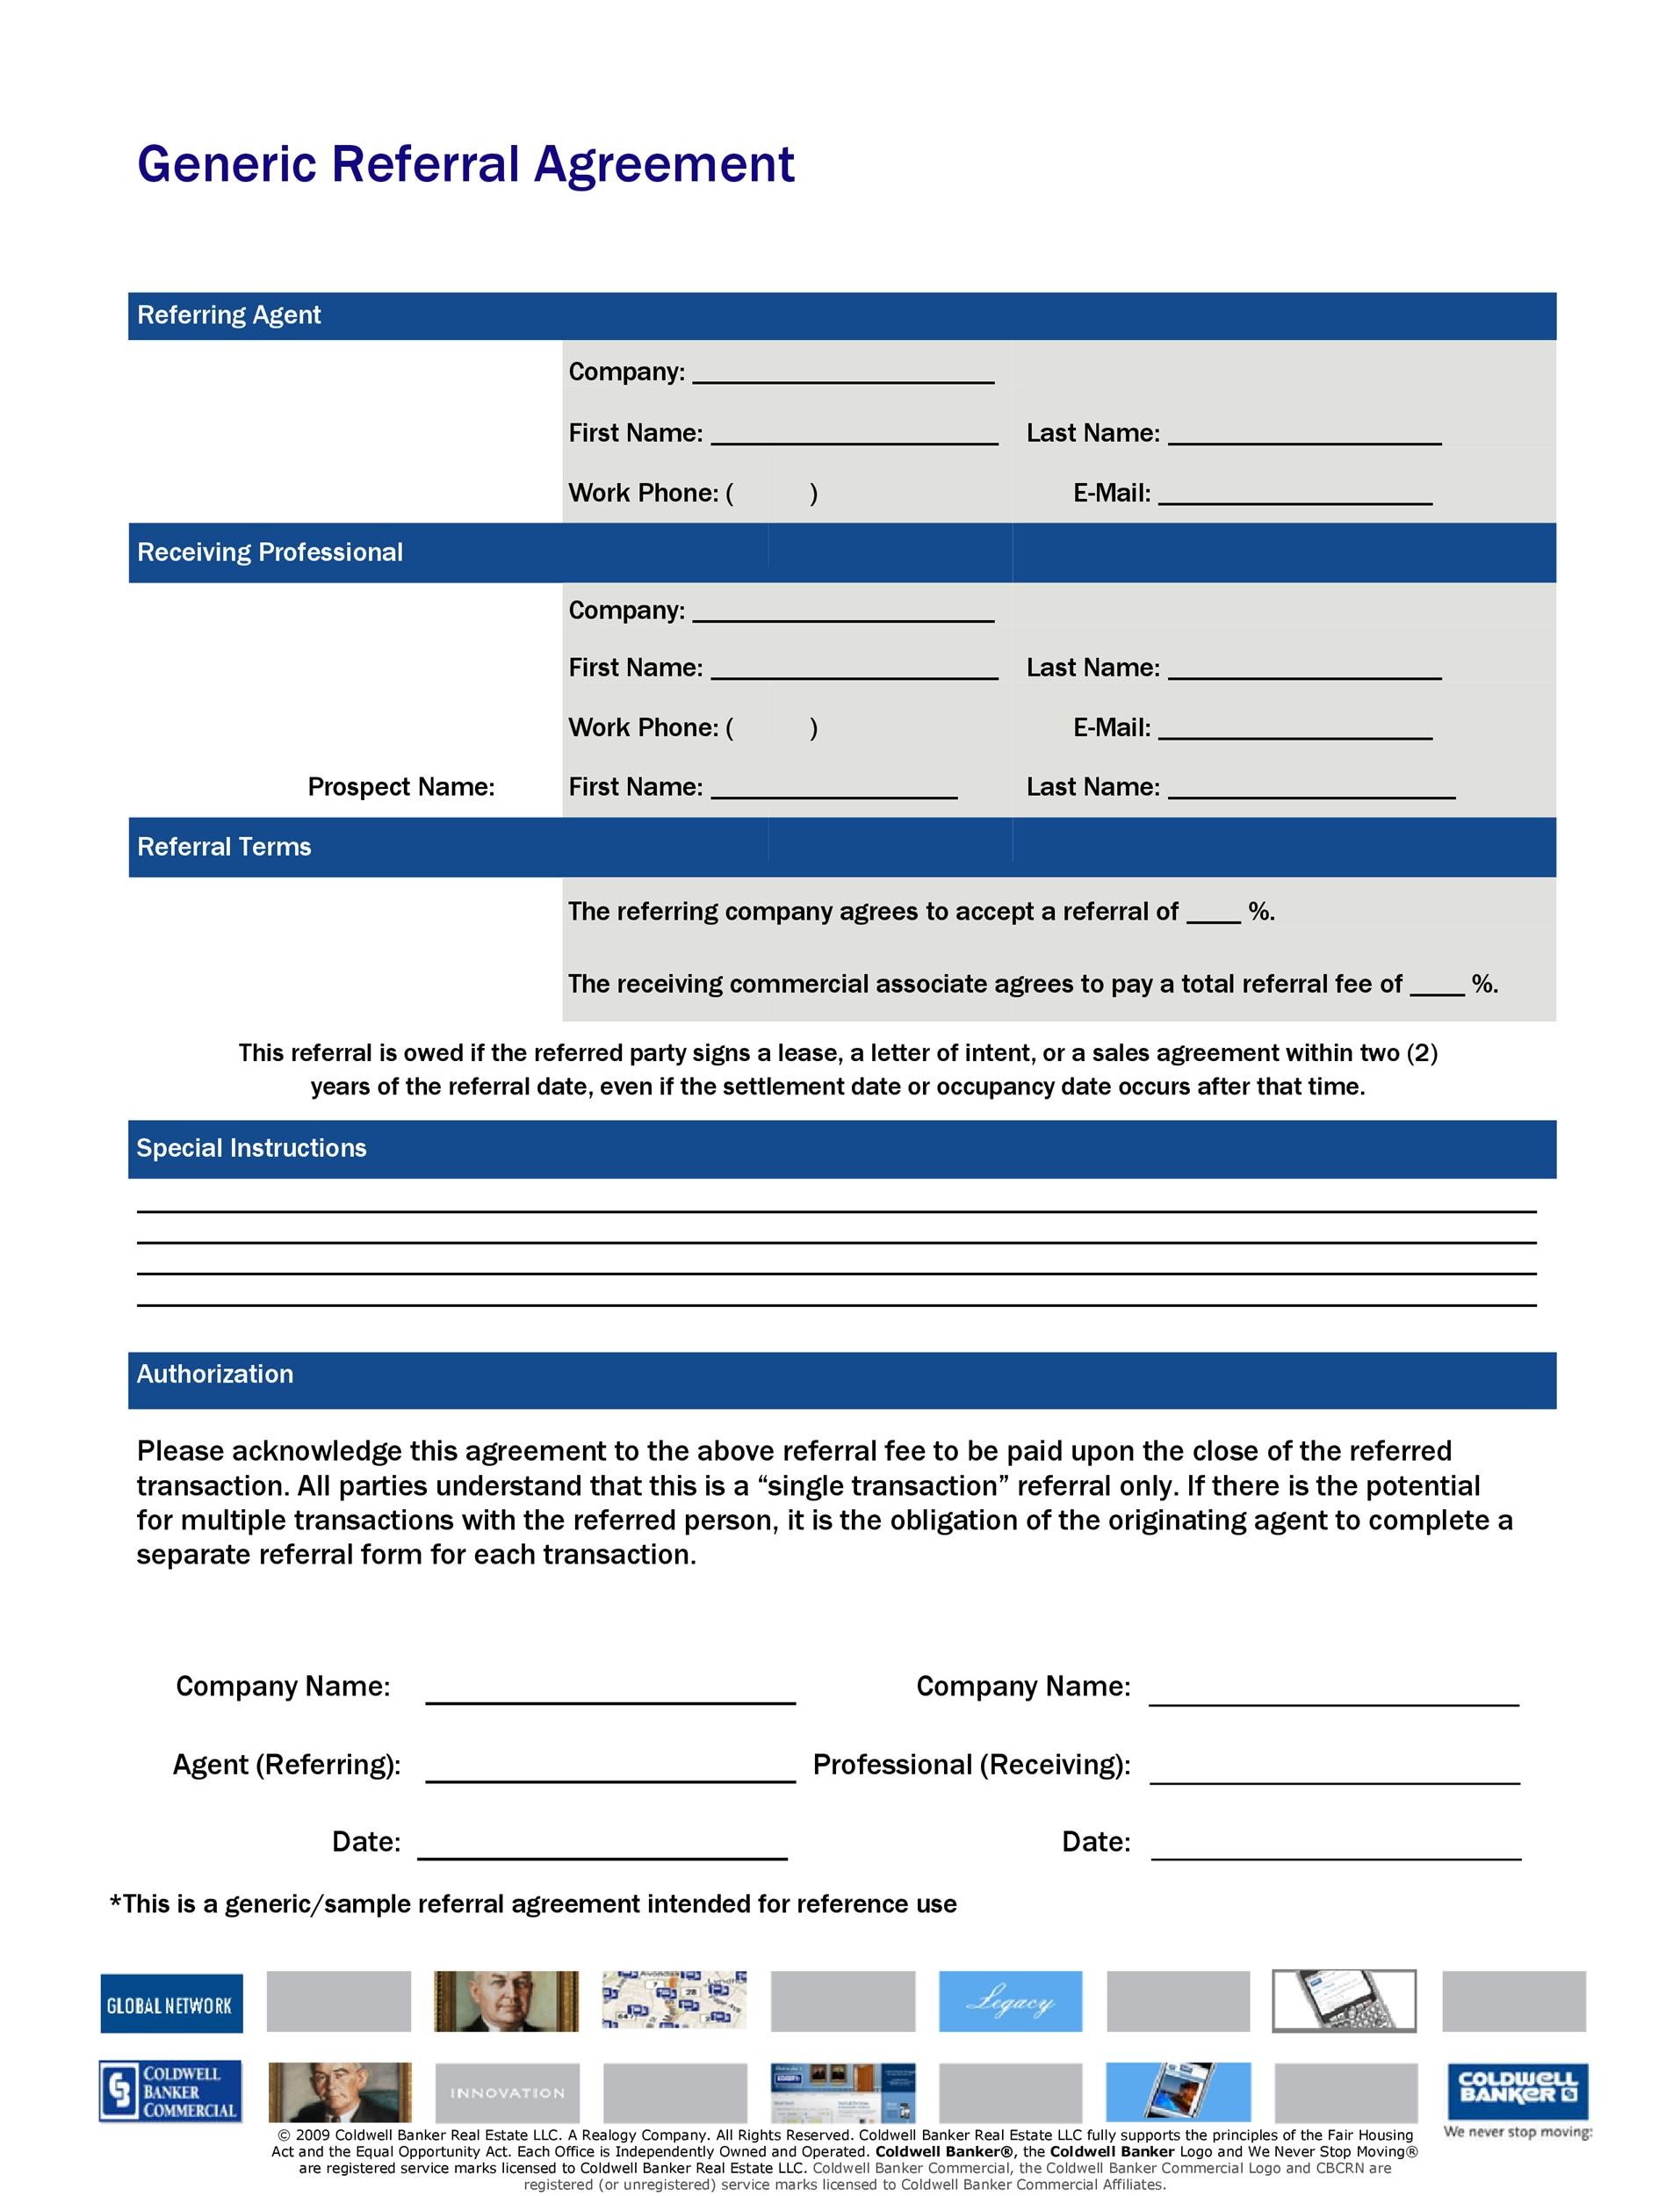 Free referral agreement template 32